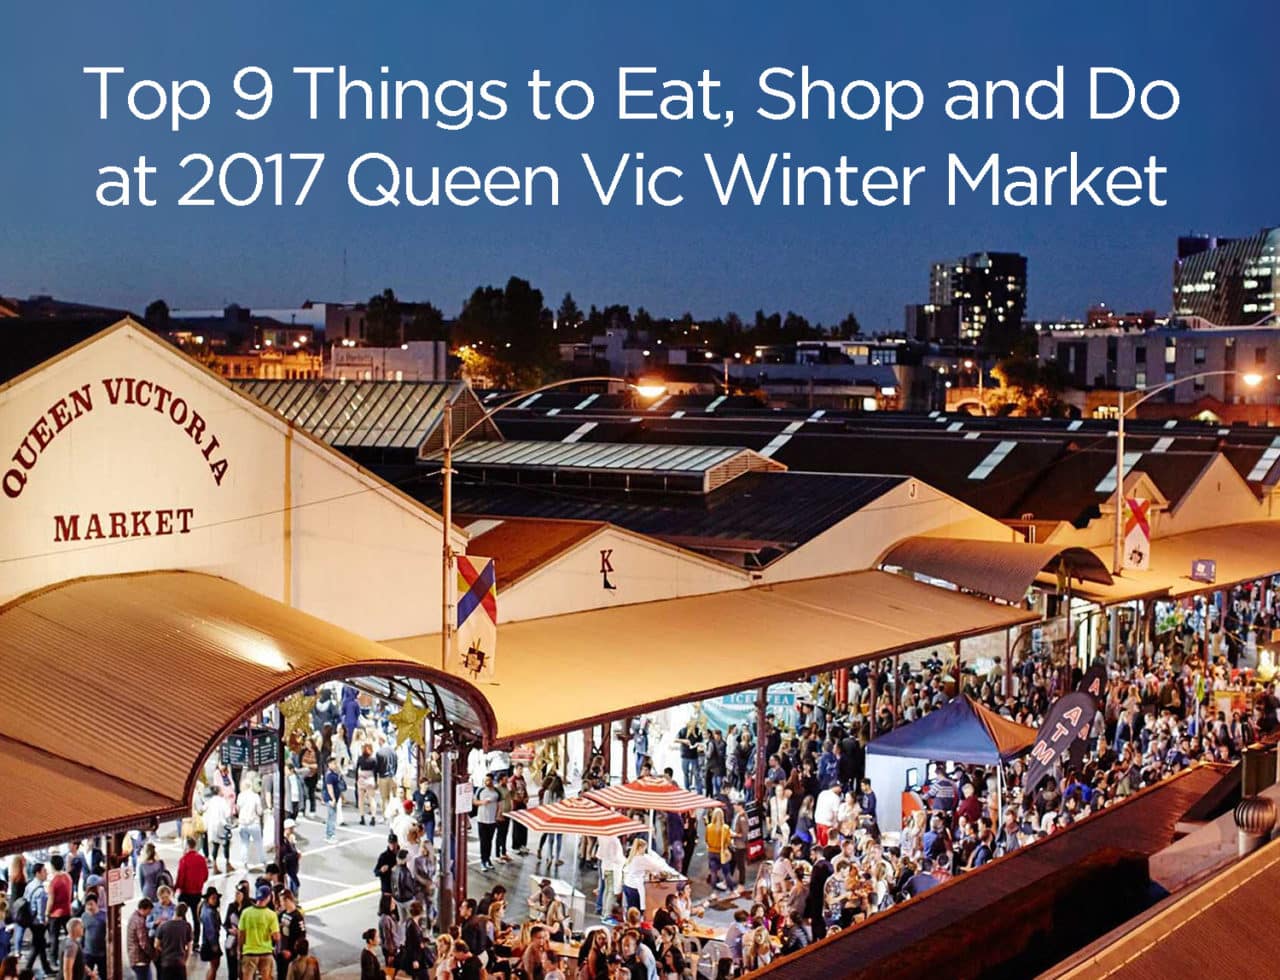 Top 9 Things to Eat, Shop and Do at 2017 Queen Vic Winter Market